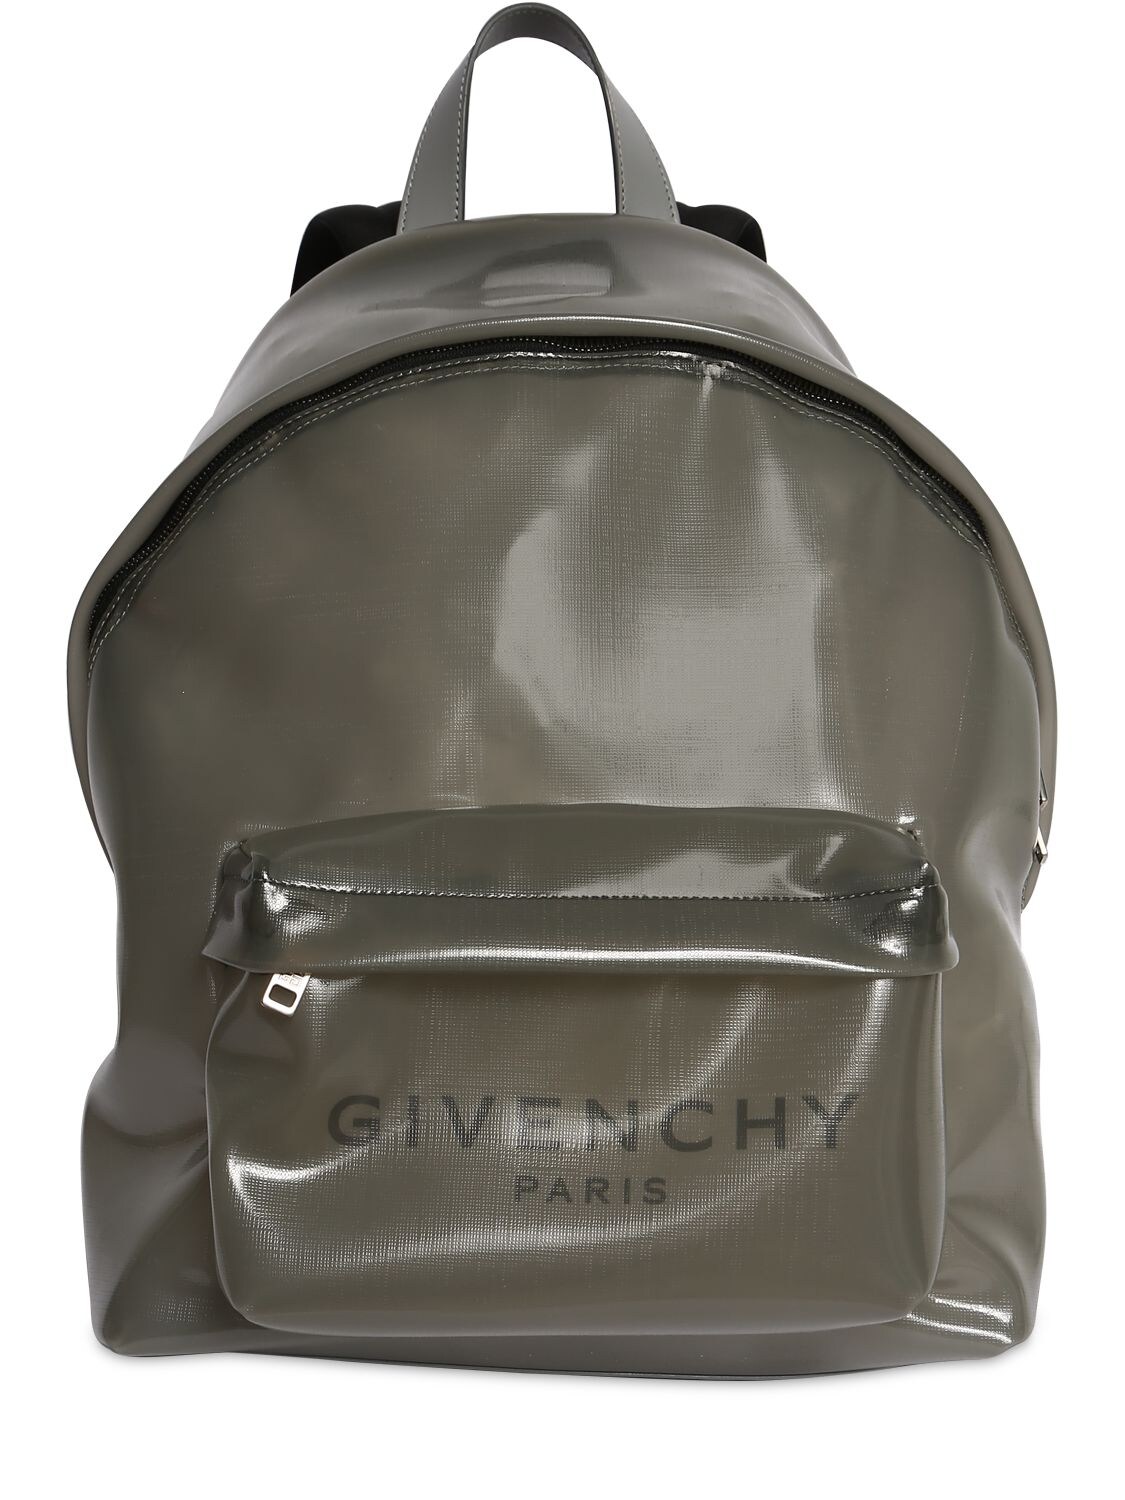 GIVENCHY LOGO BACKPACK,69IL4G009-MDIW0